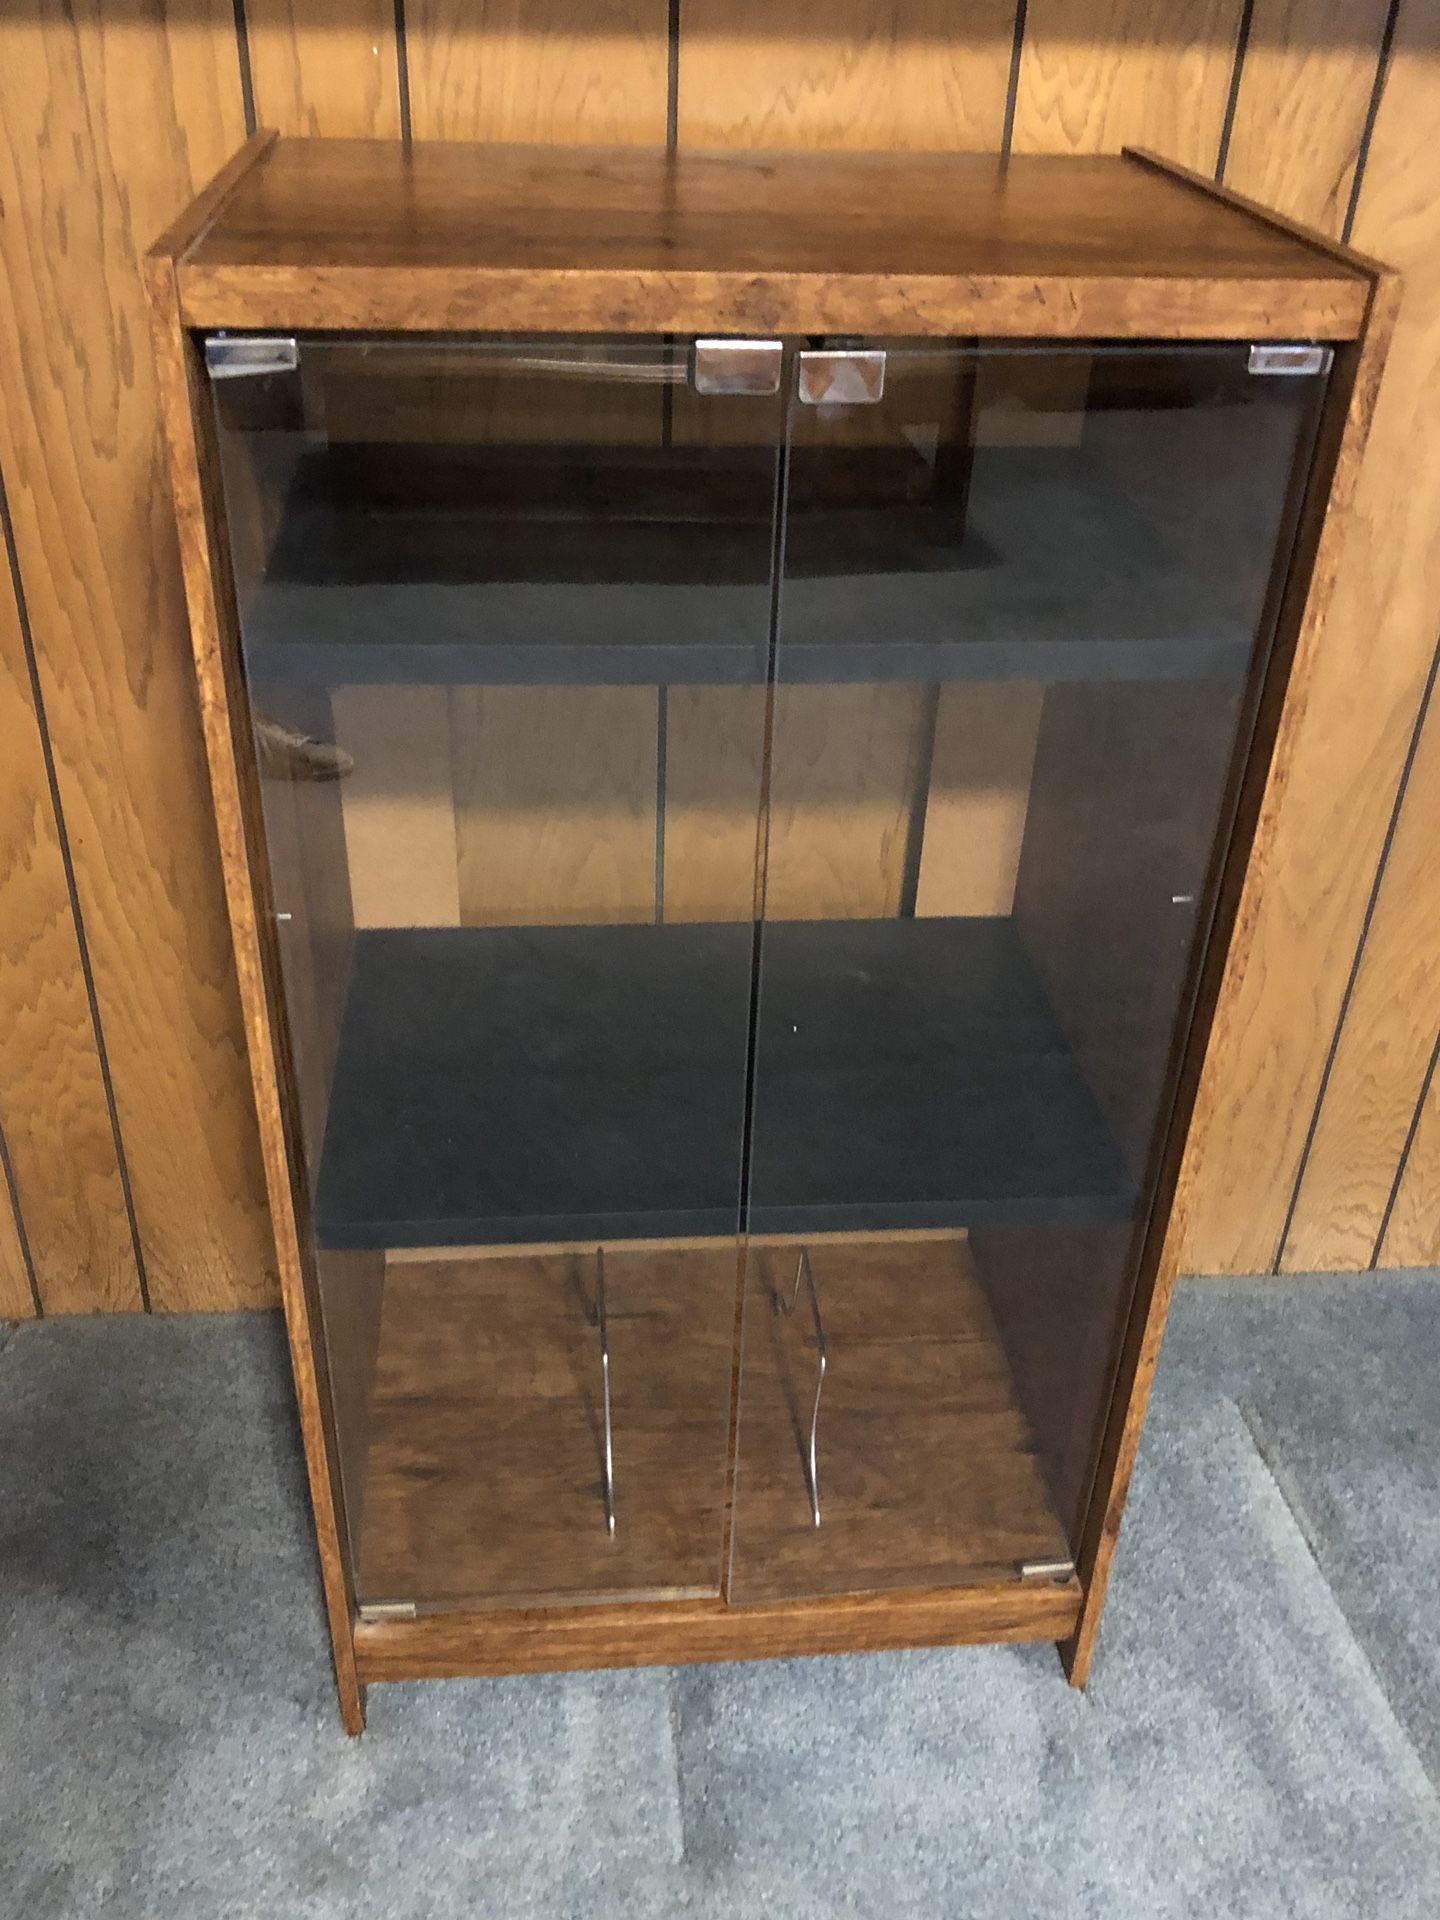 Cabinet with Glass Doors